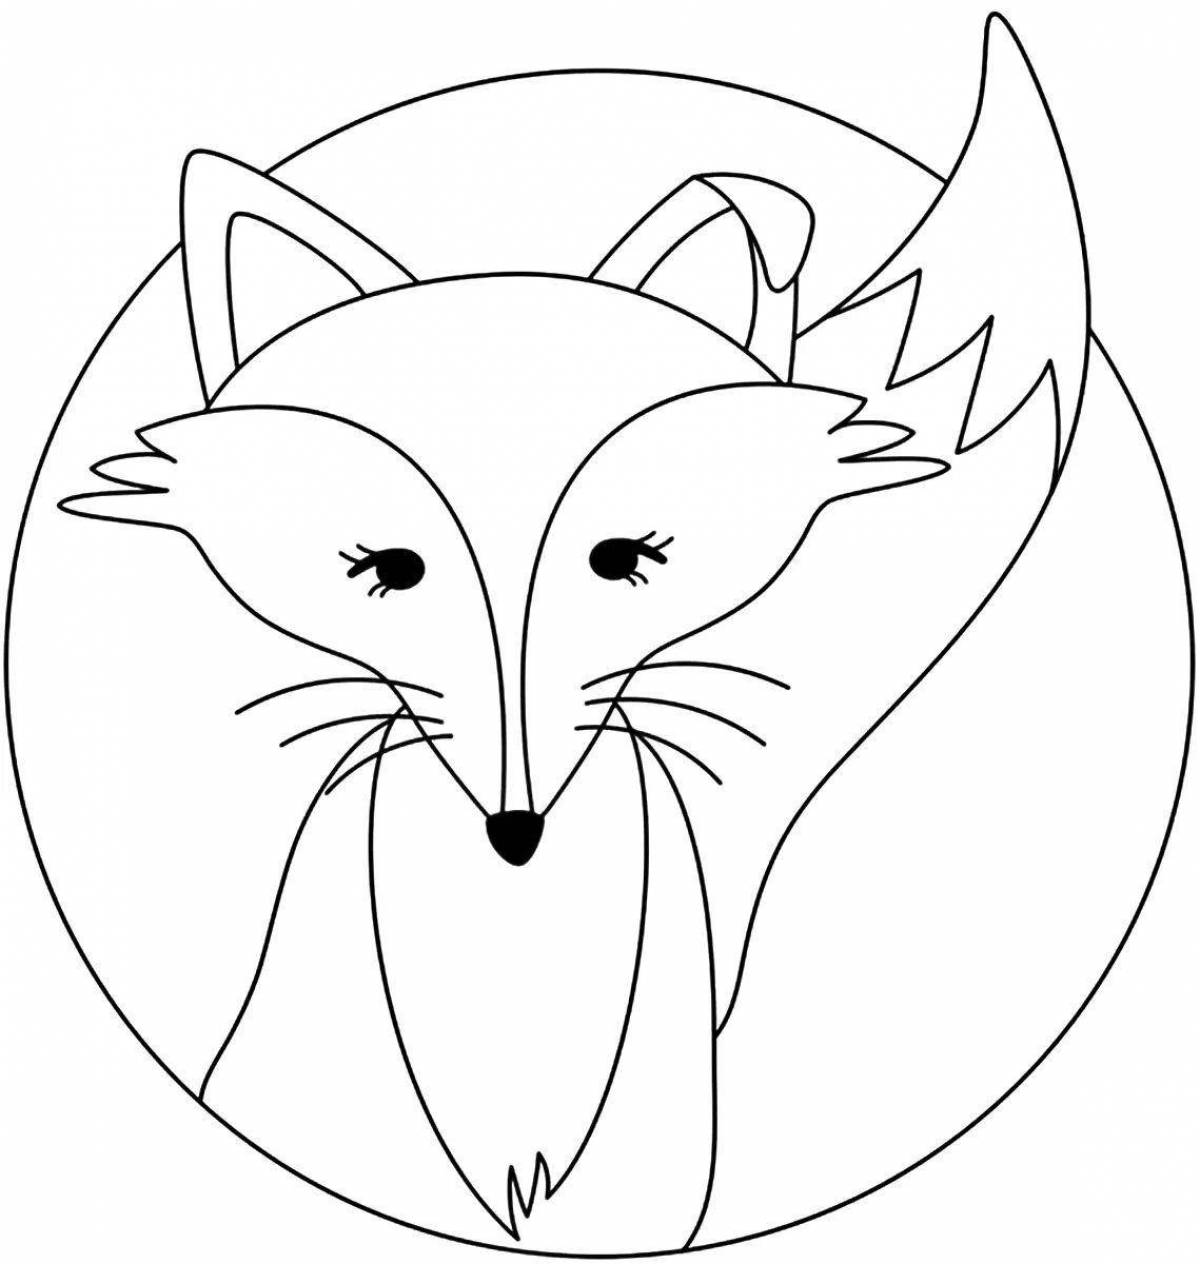 Coloring book glowing face of the fox